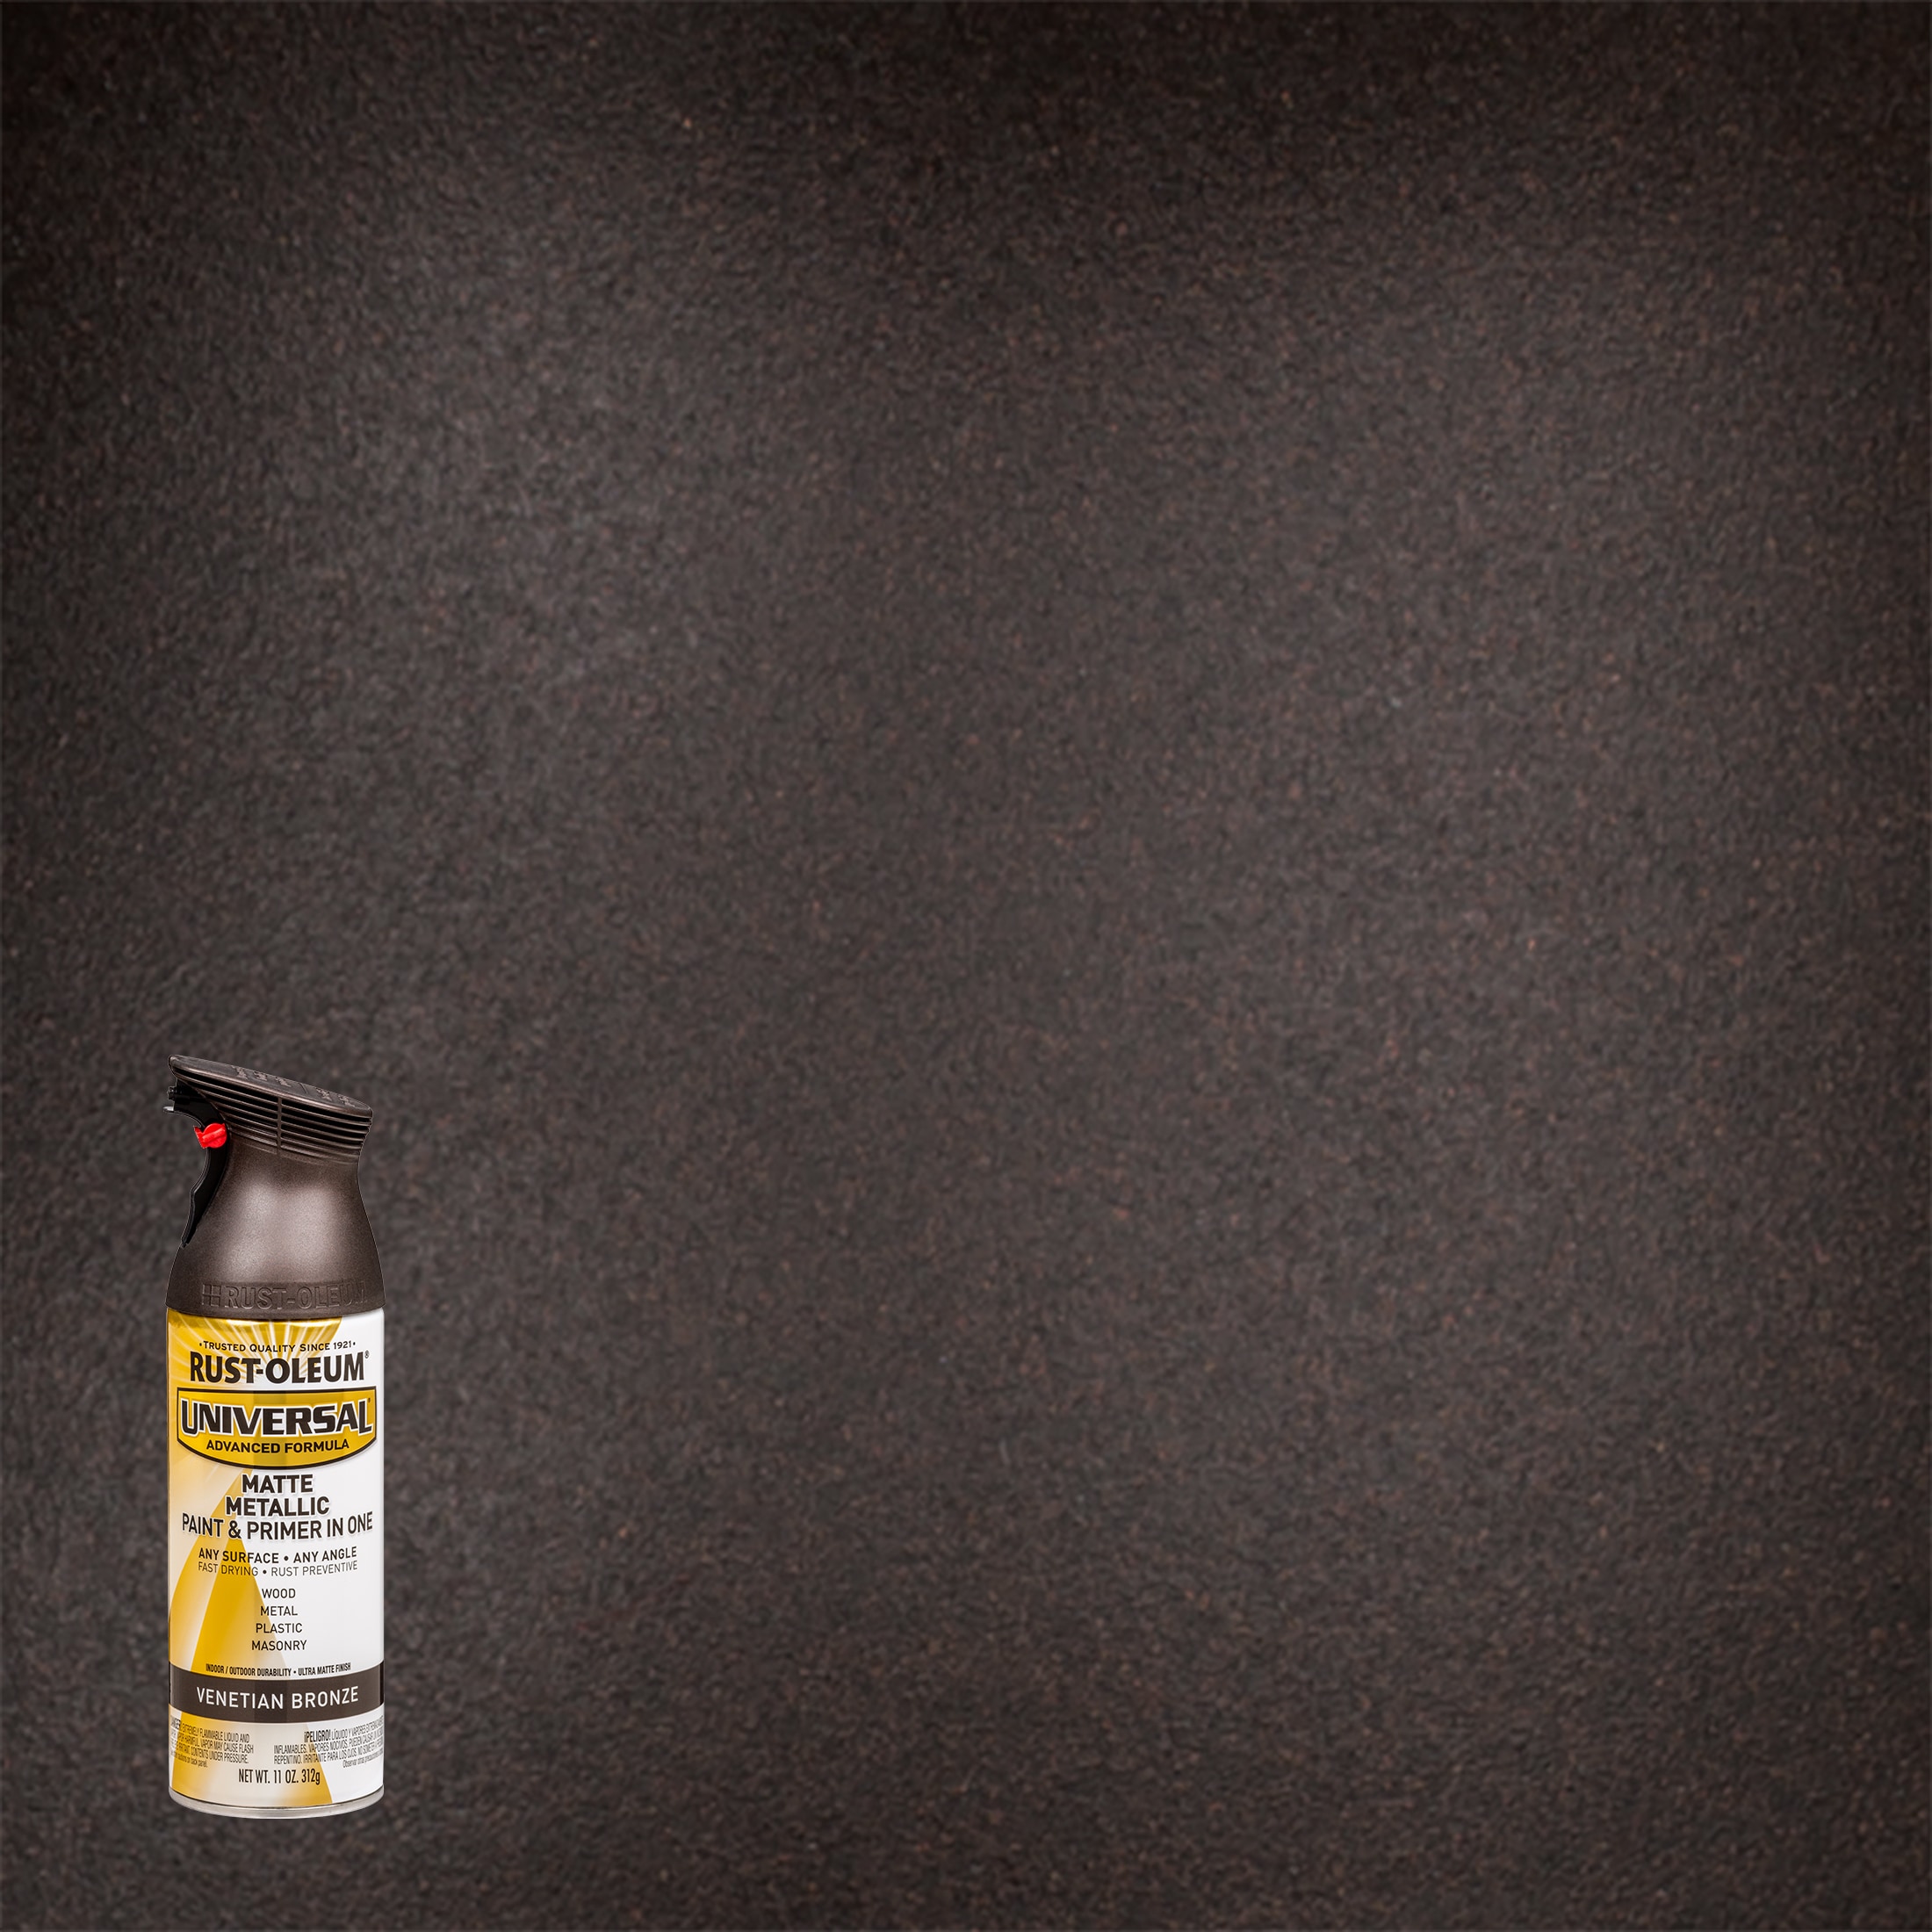 Black Ice The Original Touch Up 4oz. Spray - Black for sale online